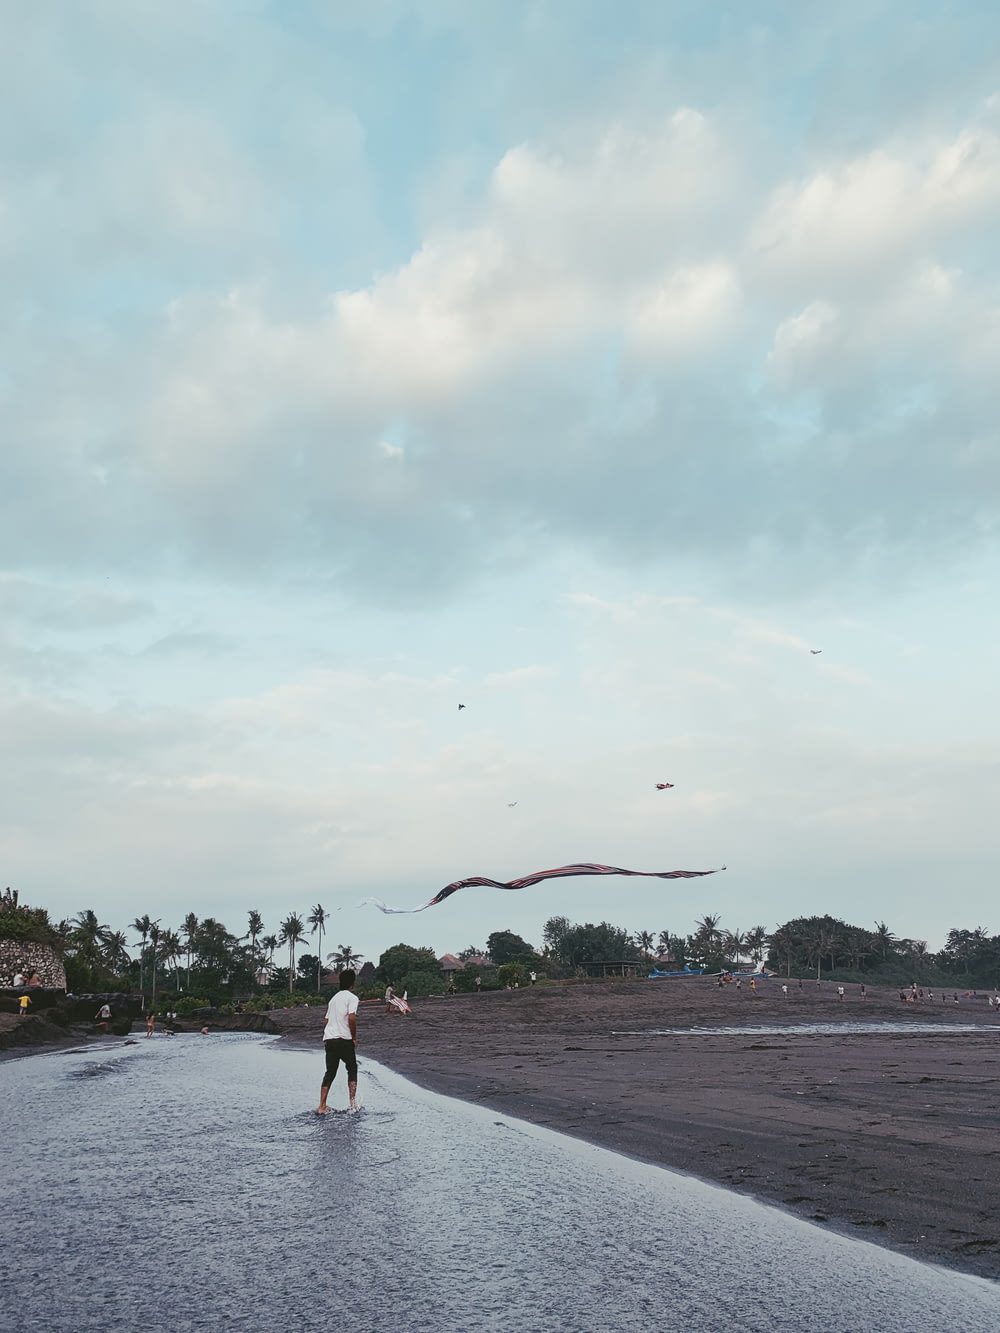 landscape photo of a man flying a kite